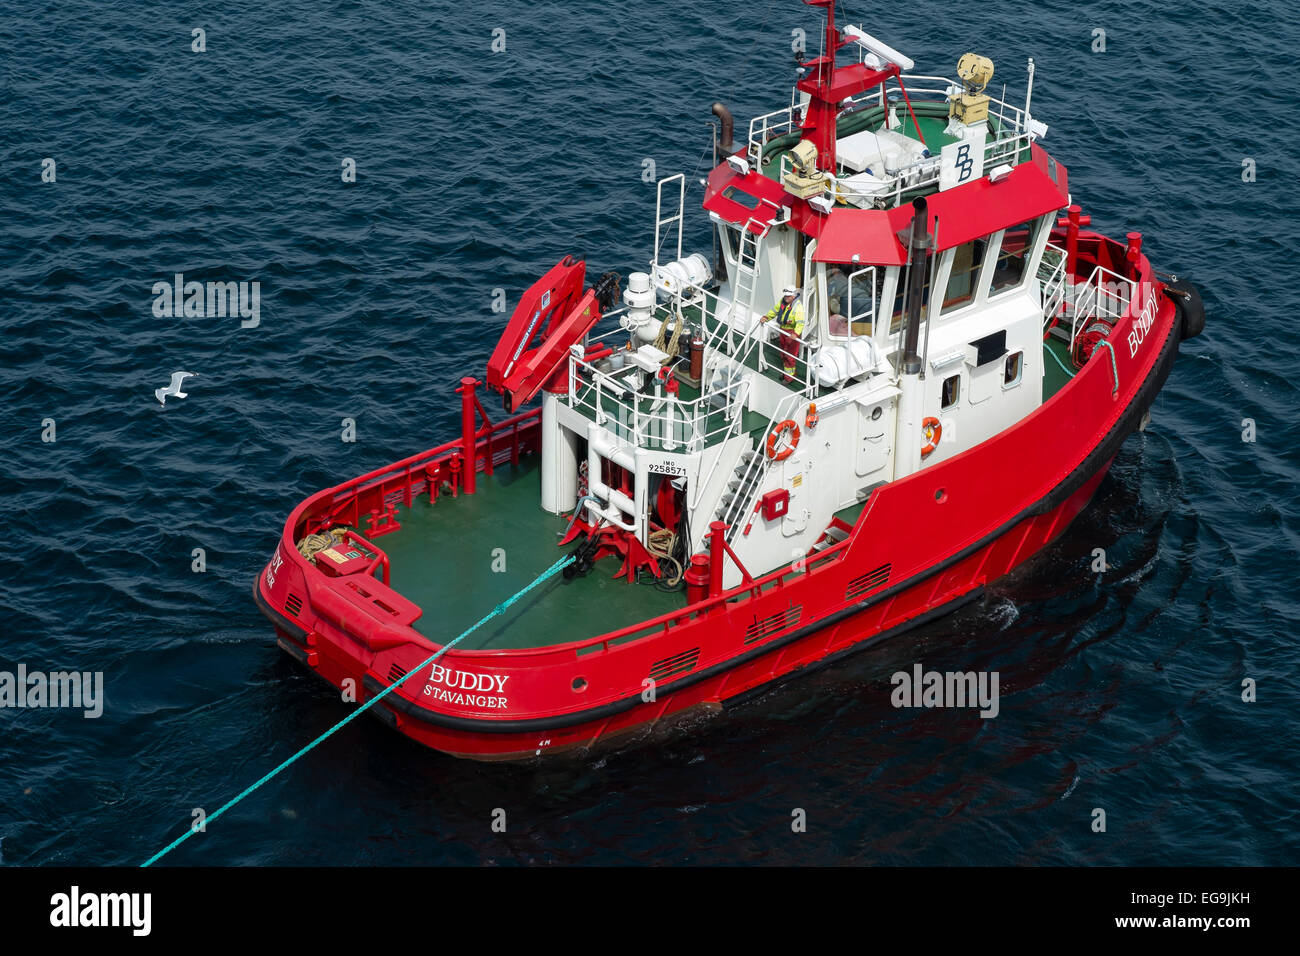 Tugboat 'Buddy' working in Stavanger harbour, Norway Stock Photo - Alamy